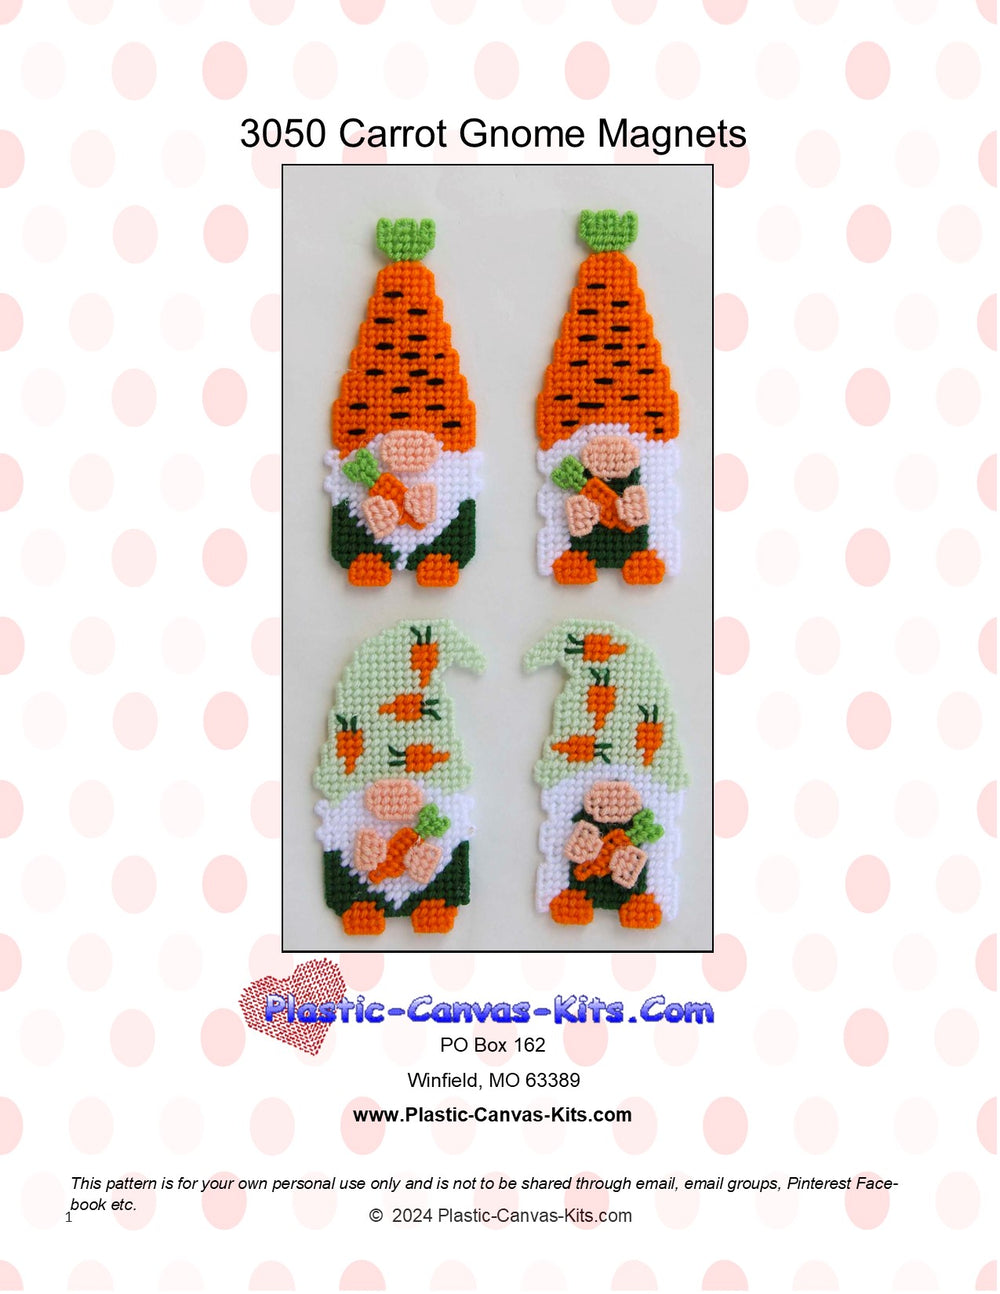 Carrot Gnome Magnets